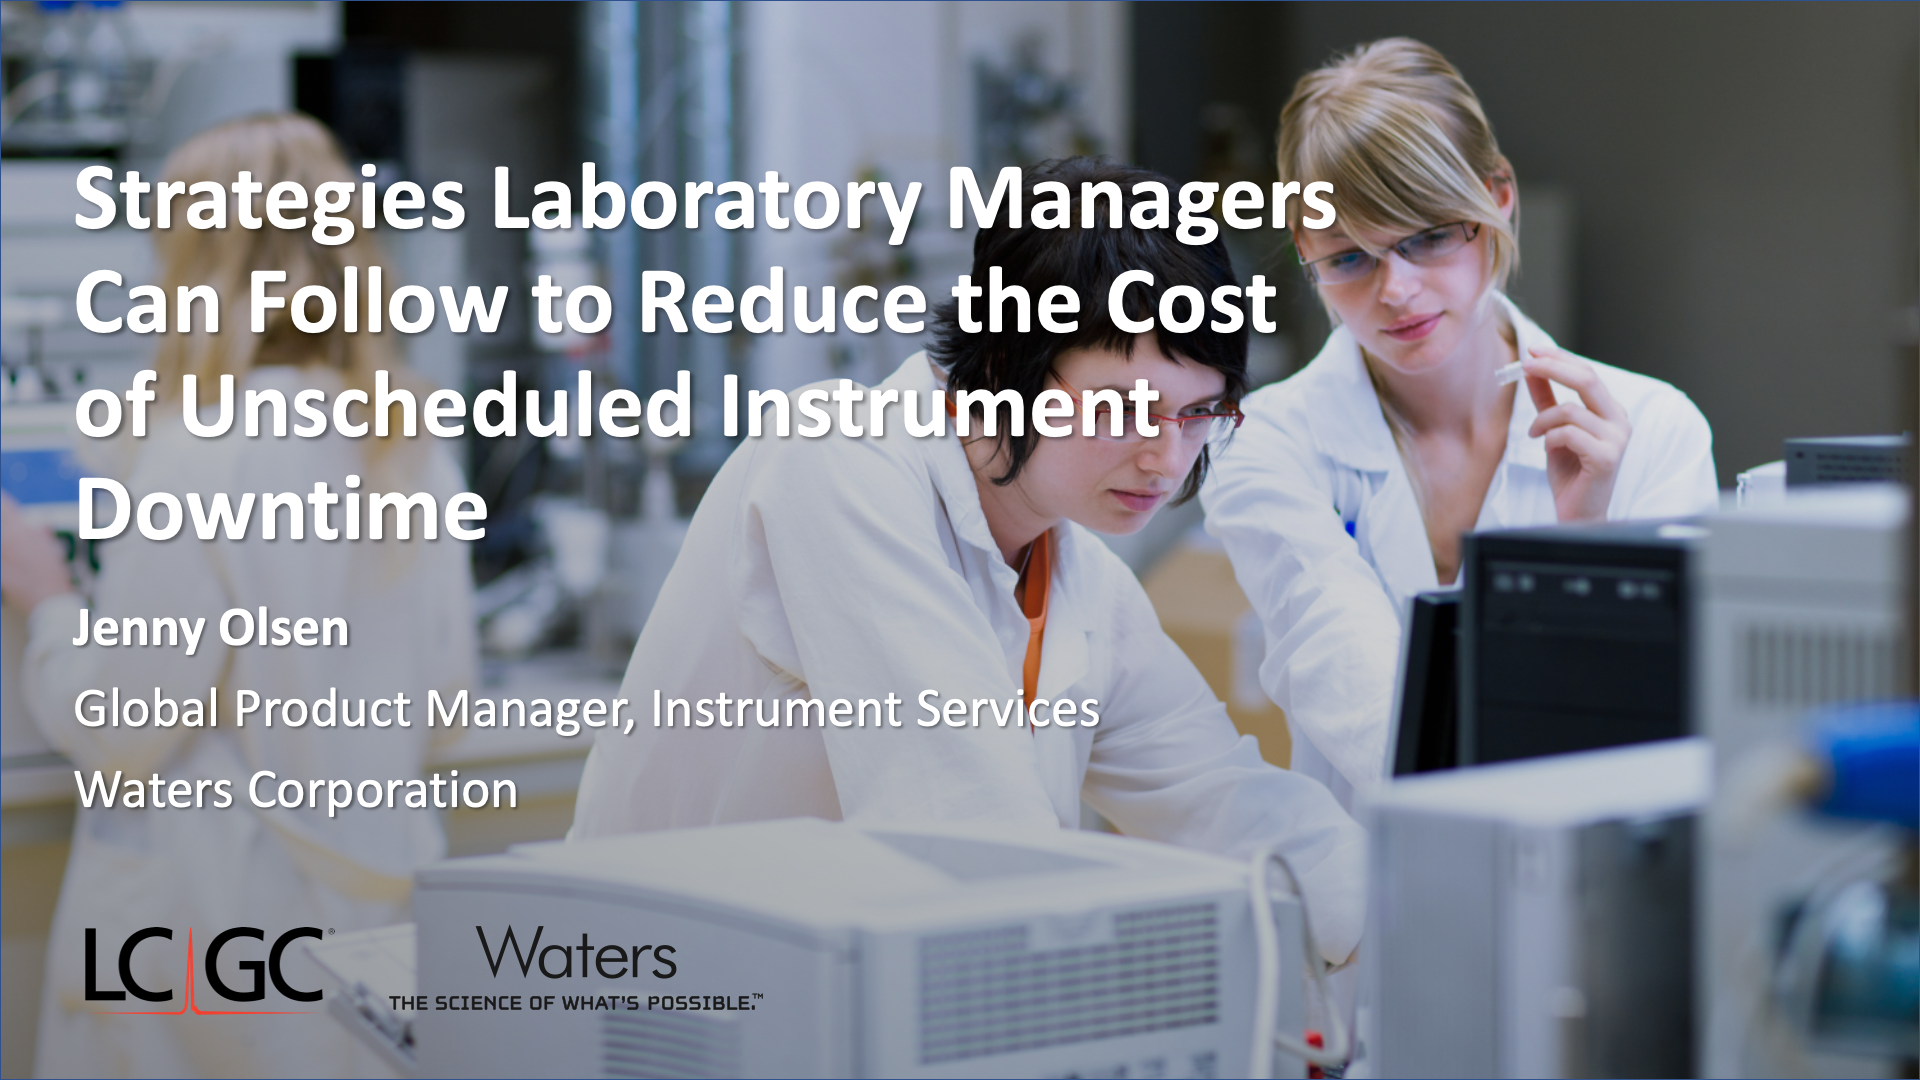 Strategies Laboratory Managers Can Follow to Reduce the Cost of Unscheduled Instrument Downtime